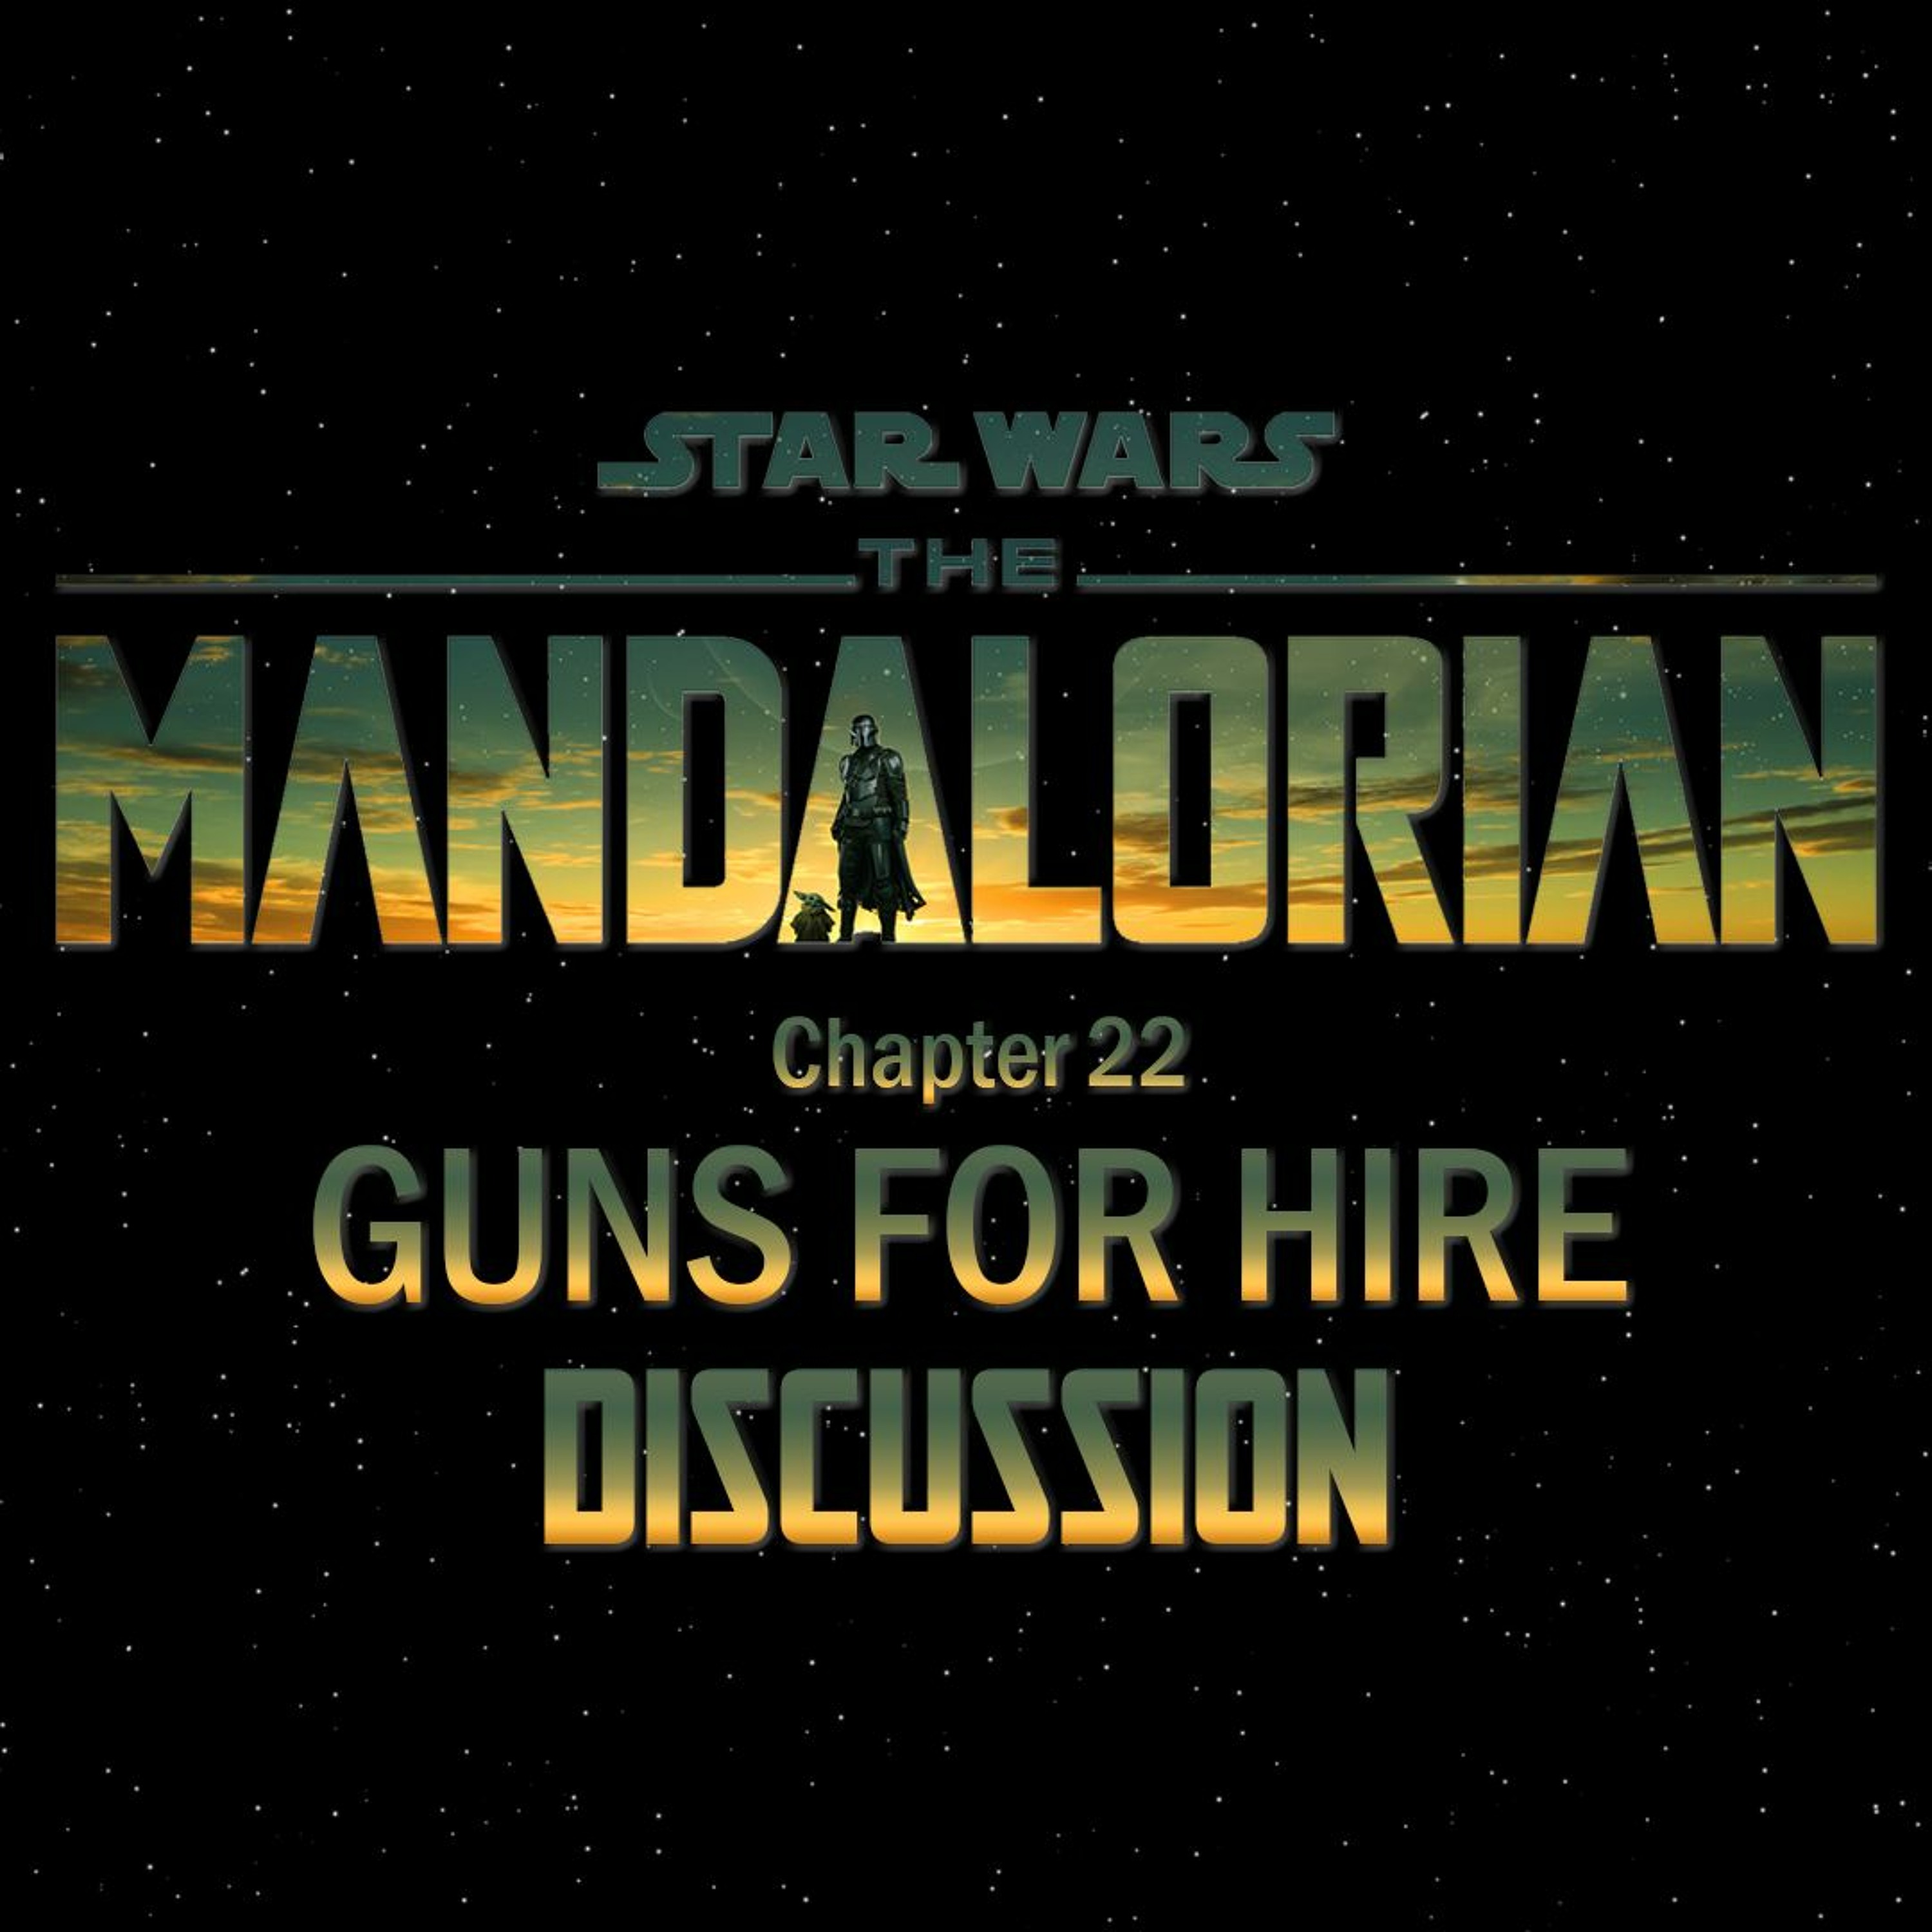 The Mandalorian Chapter 22: Guns For Hire